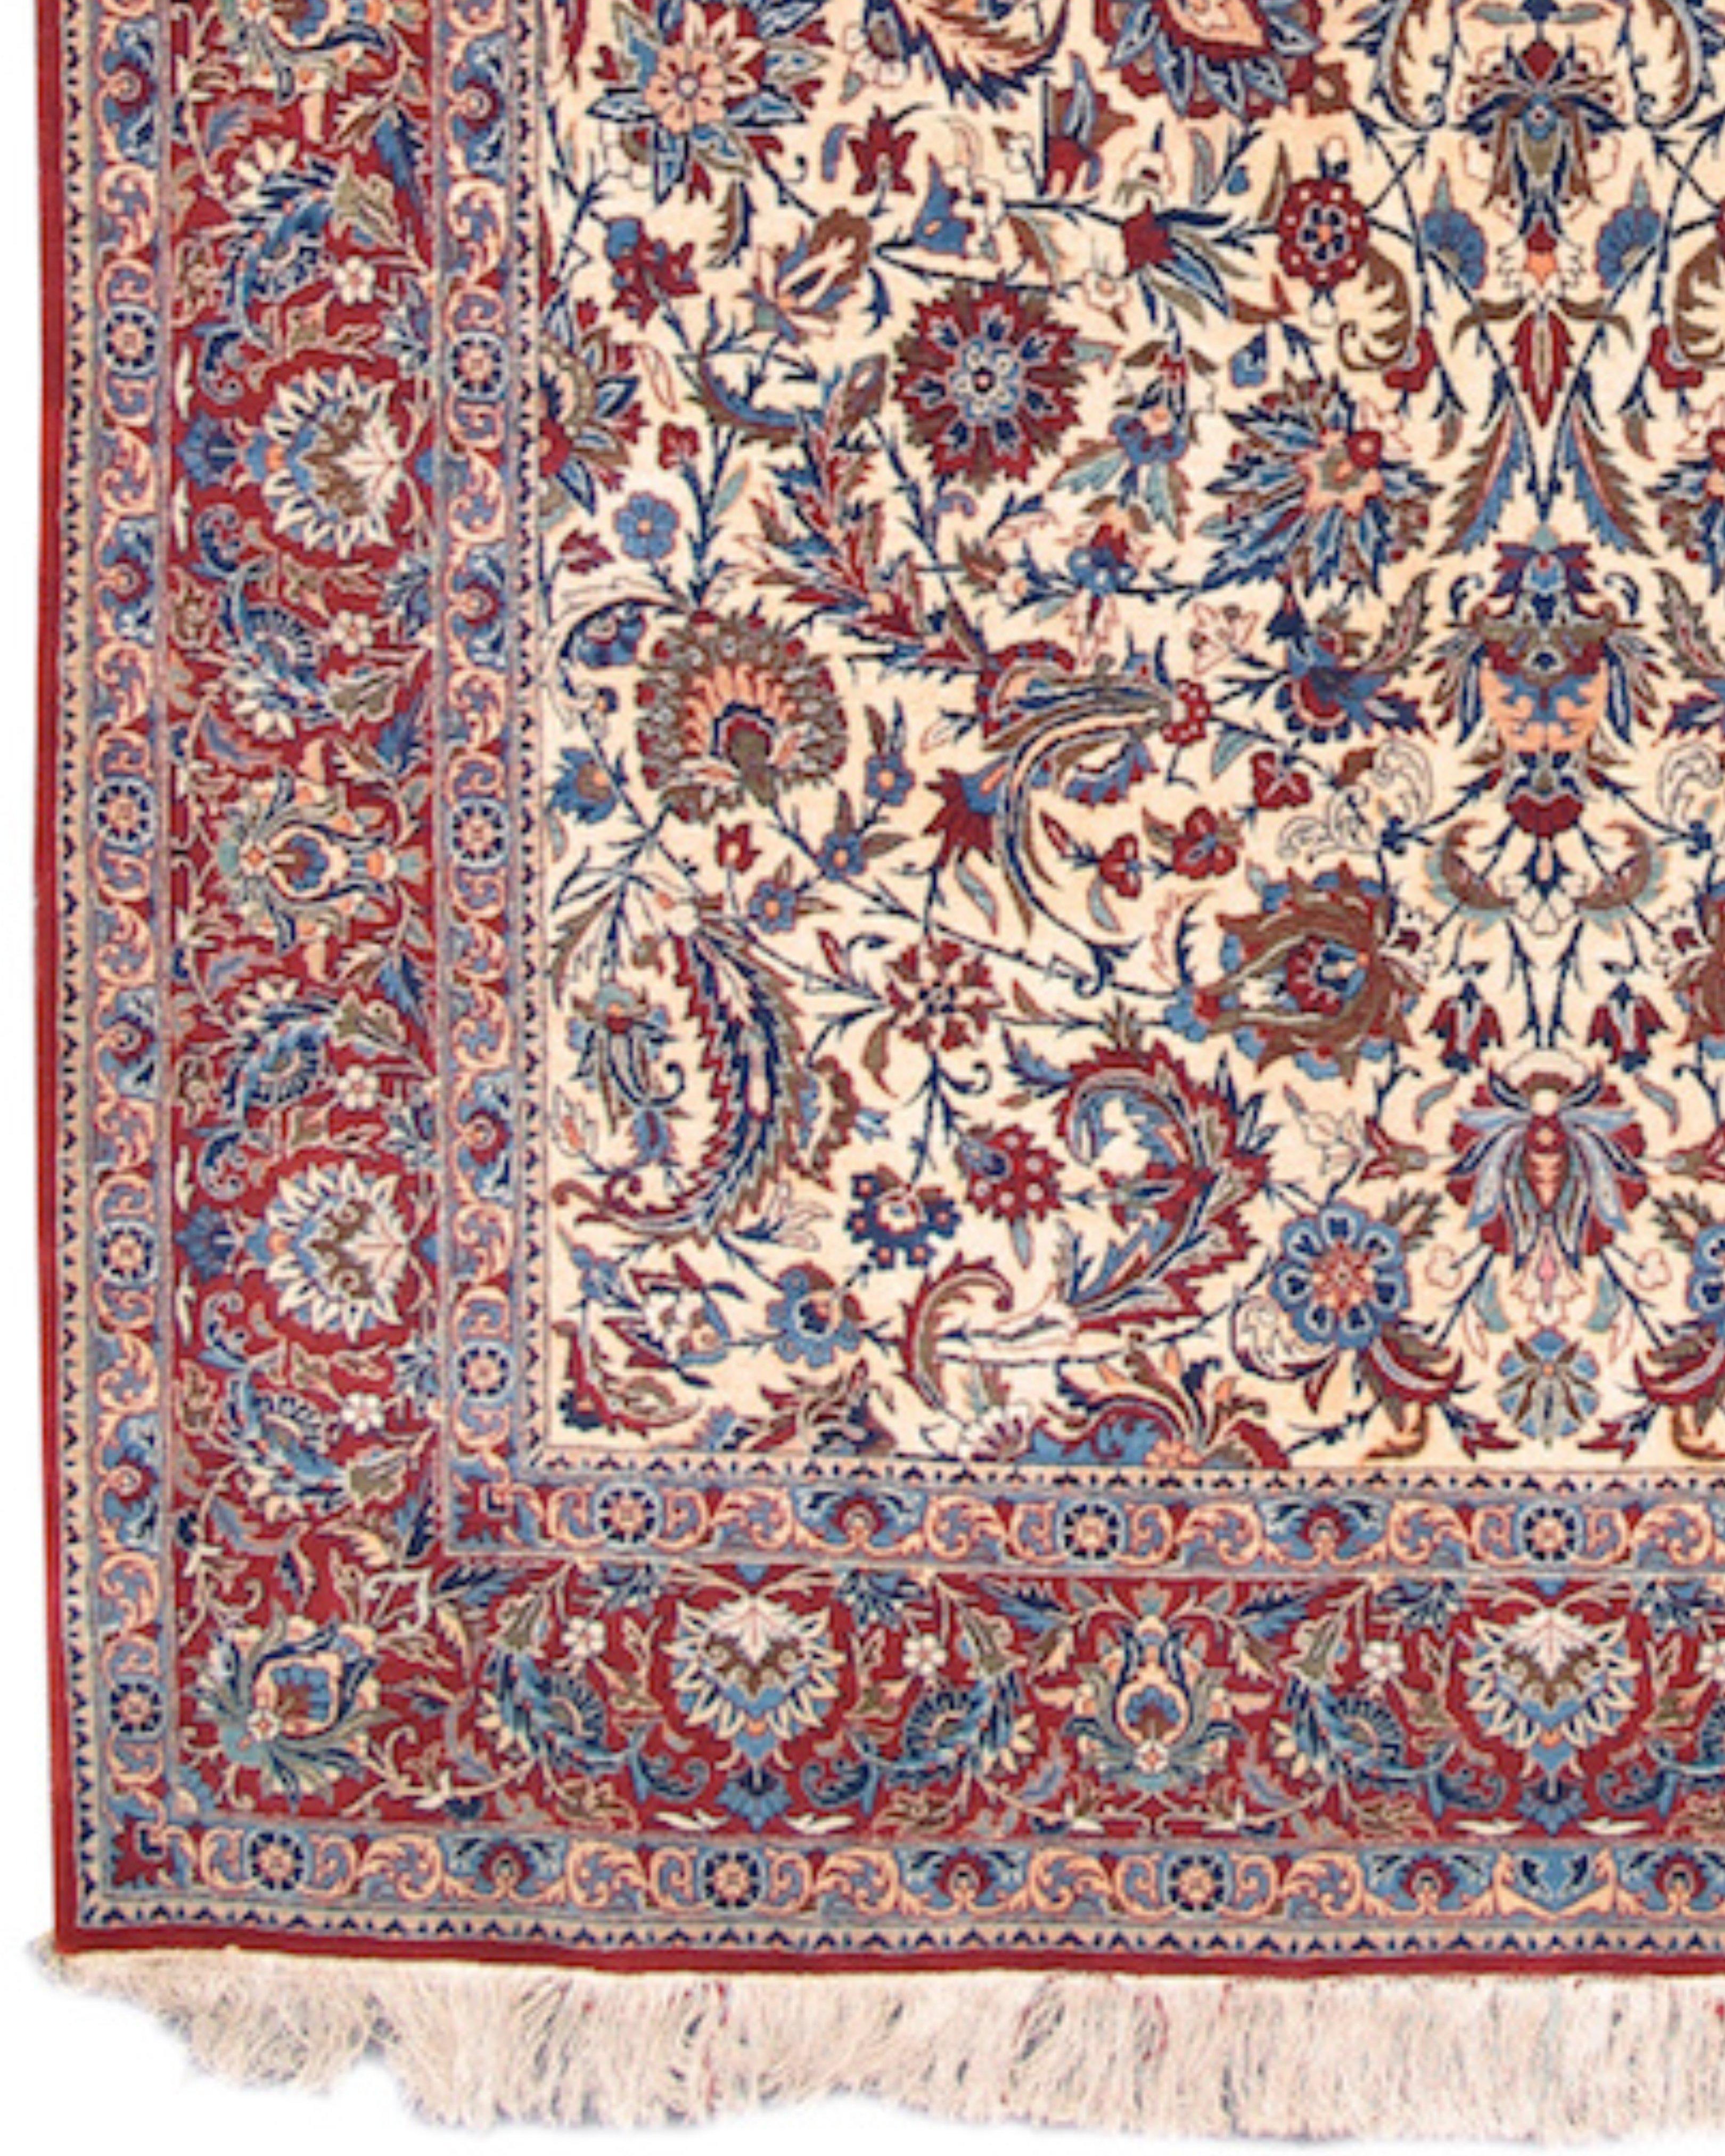 Hand-Woven Persian Silk Isfahan Rug, Mid-20th Century For Sale